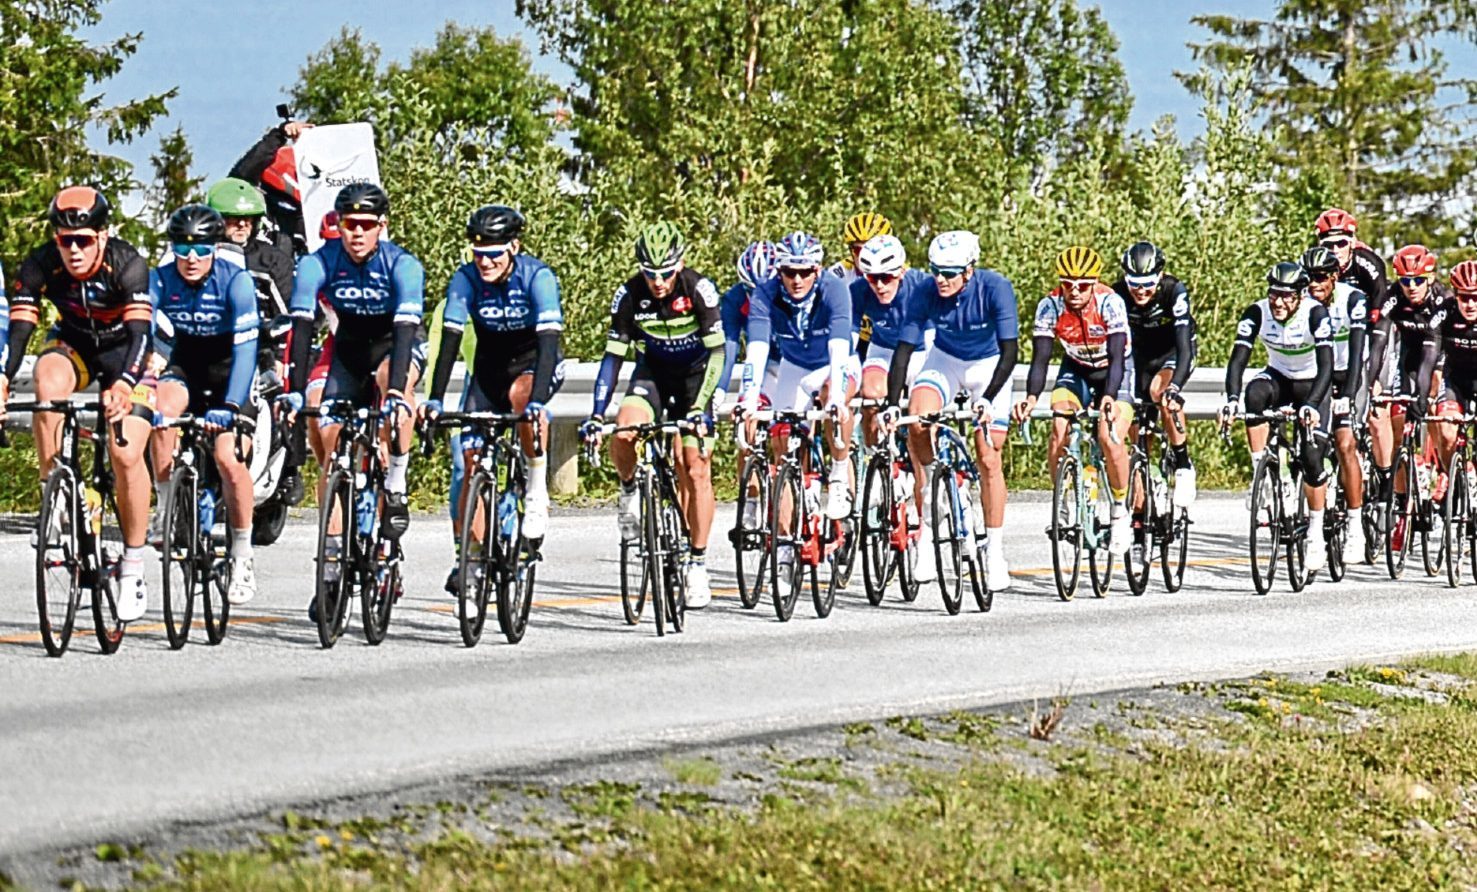 Club cyclists take part in a road race.